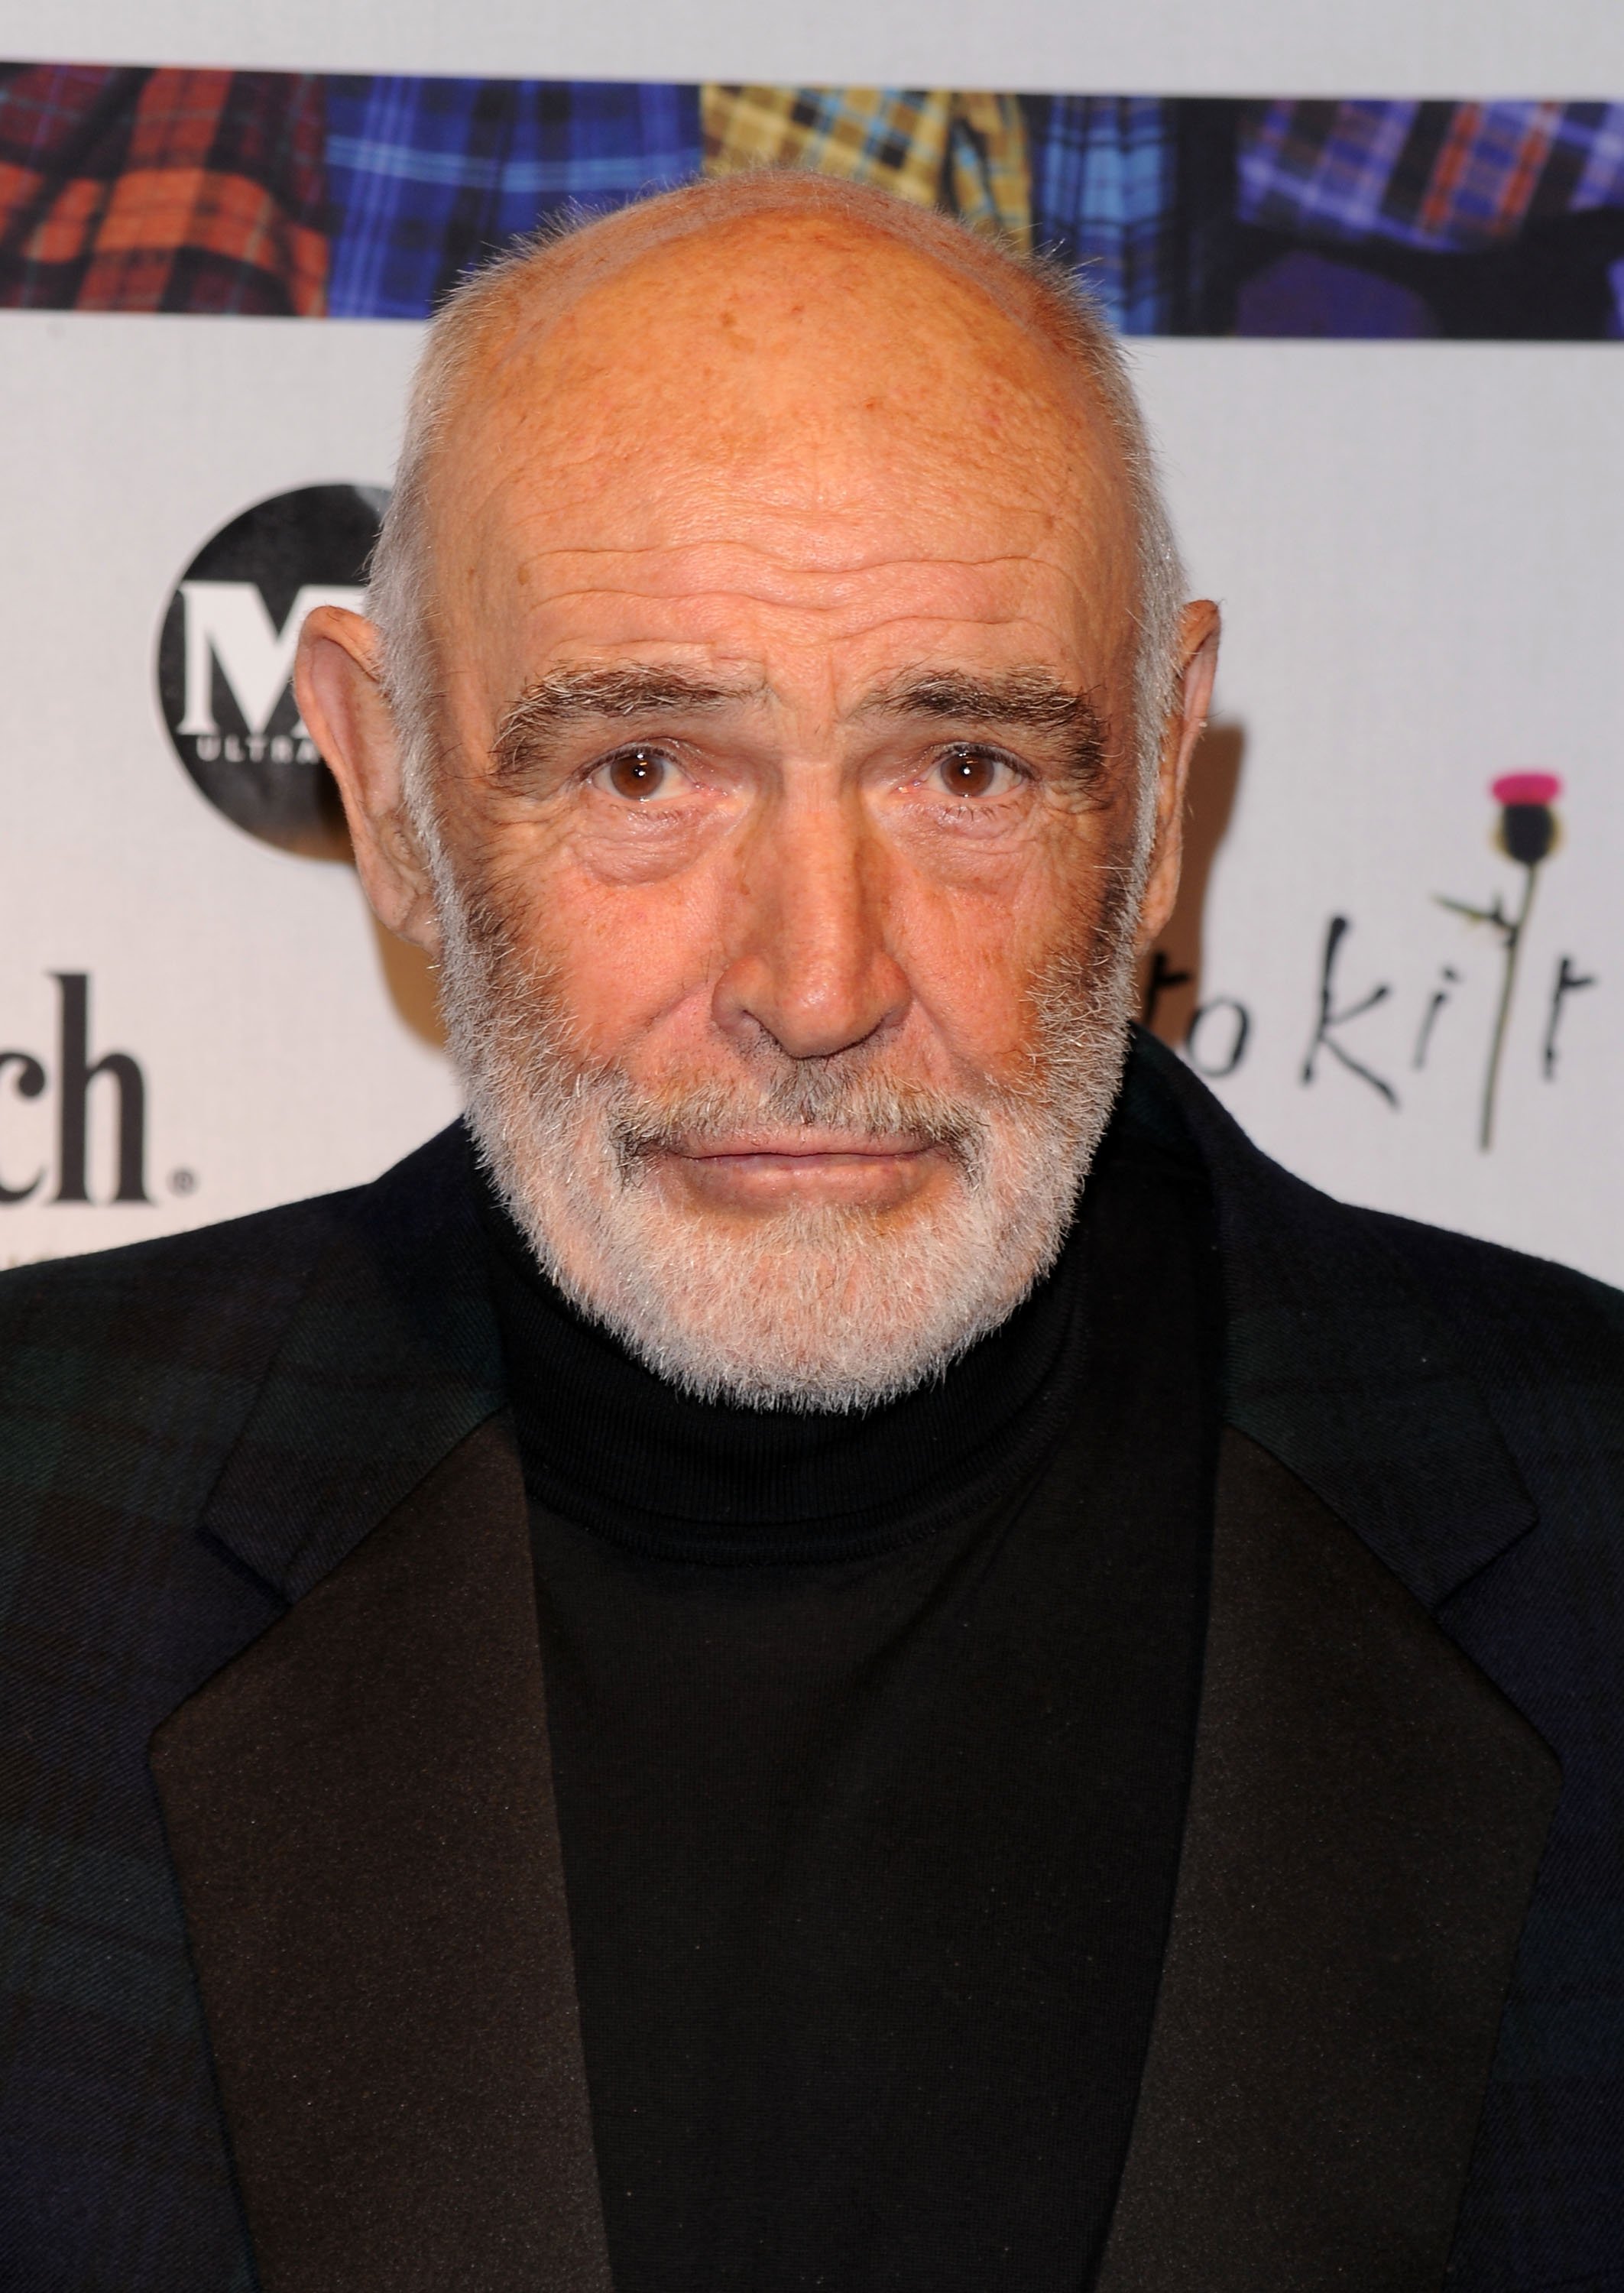 Actor Sean Connery at M12 Ultra Lounge on April 5 2010 in New York City  | Source: Getty Images